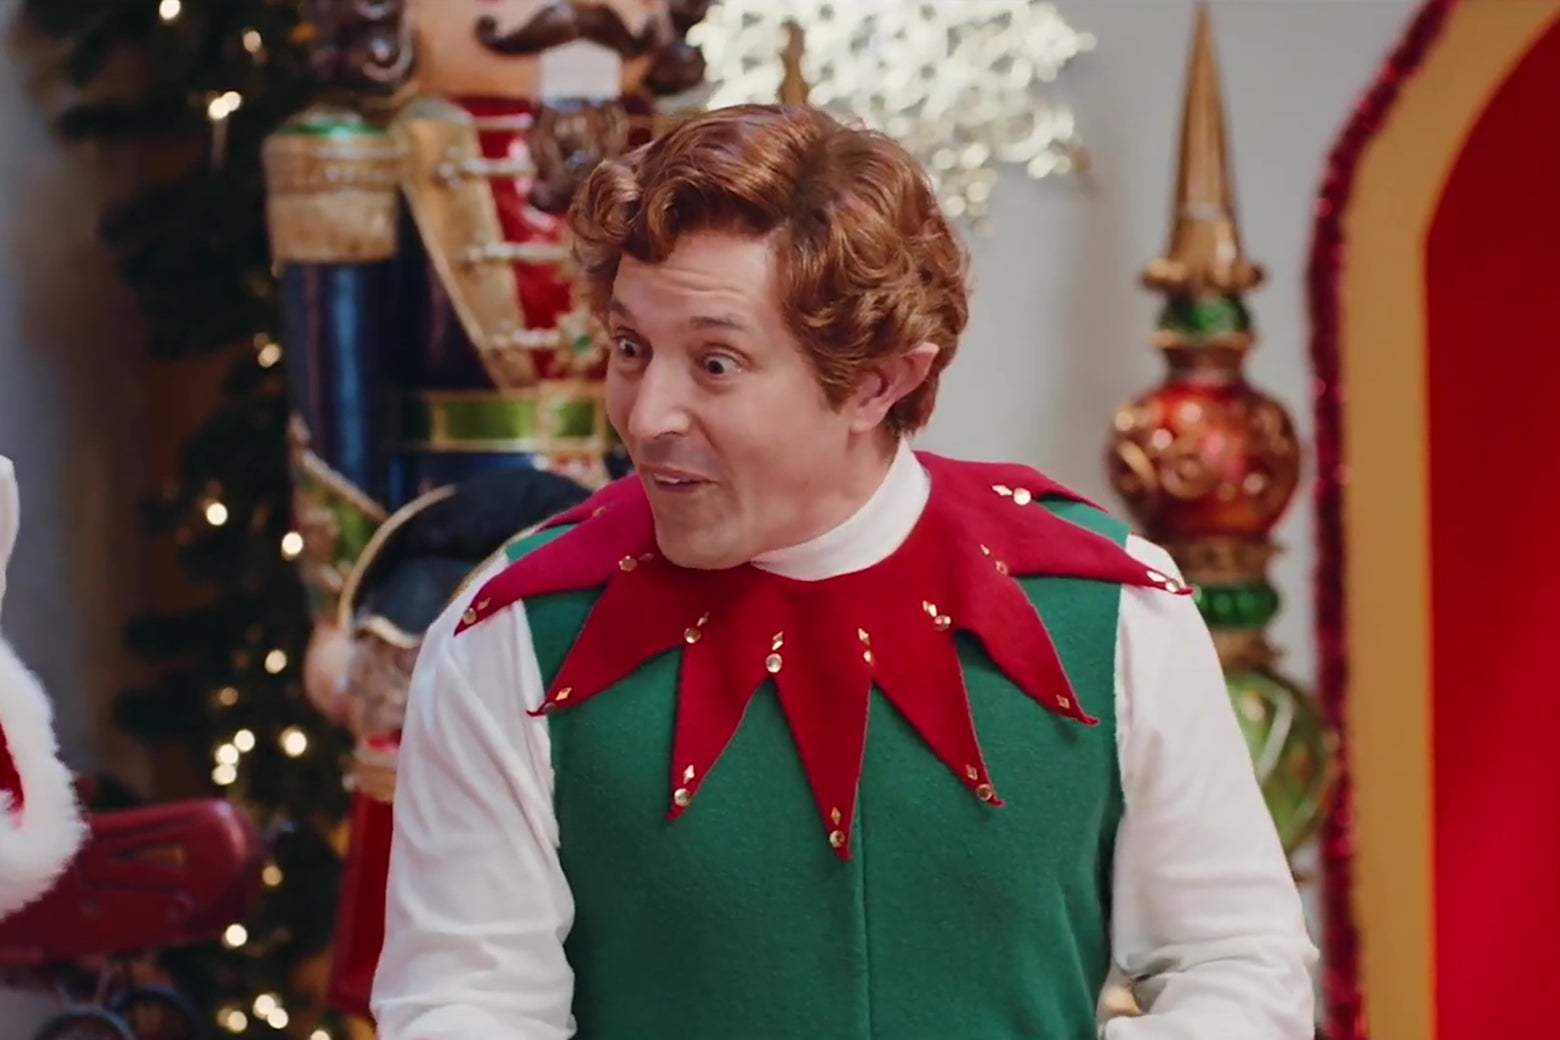 Beck Bennett dressed as one of Santa's Elves, making an extremely silly face.